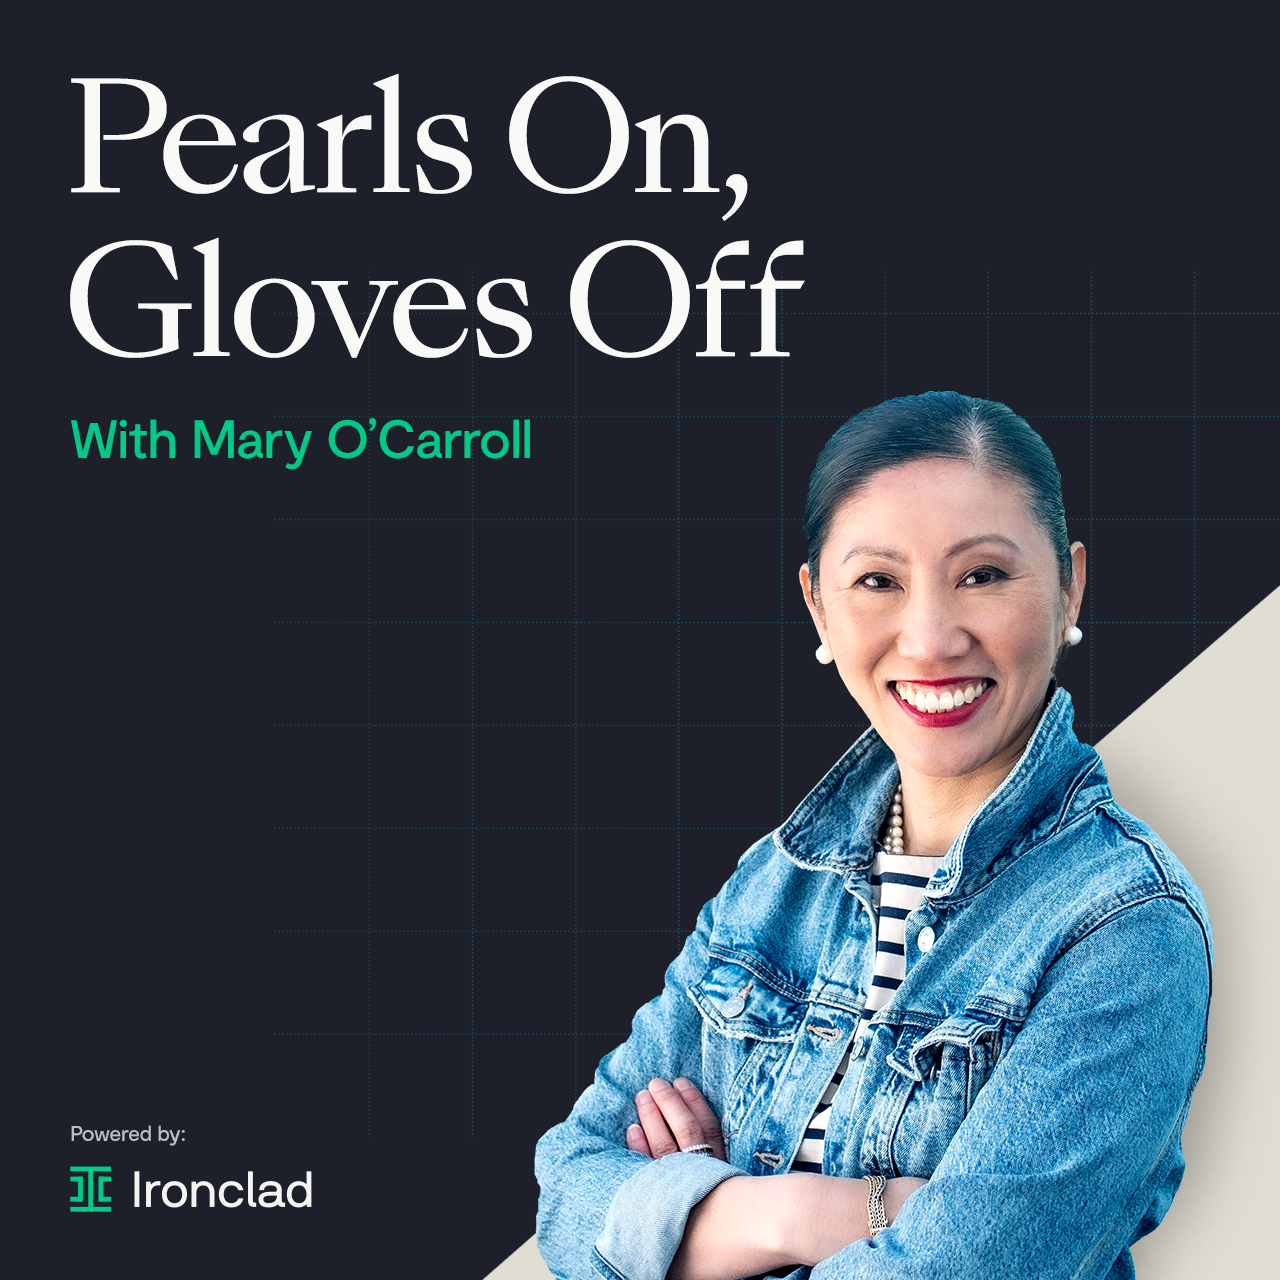 Pearls On, Gloves Off